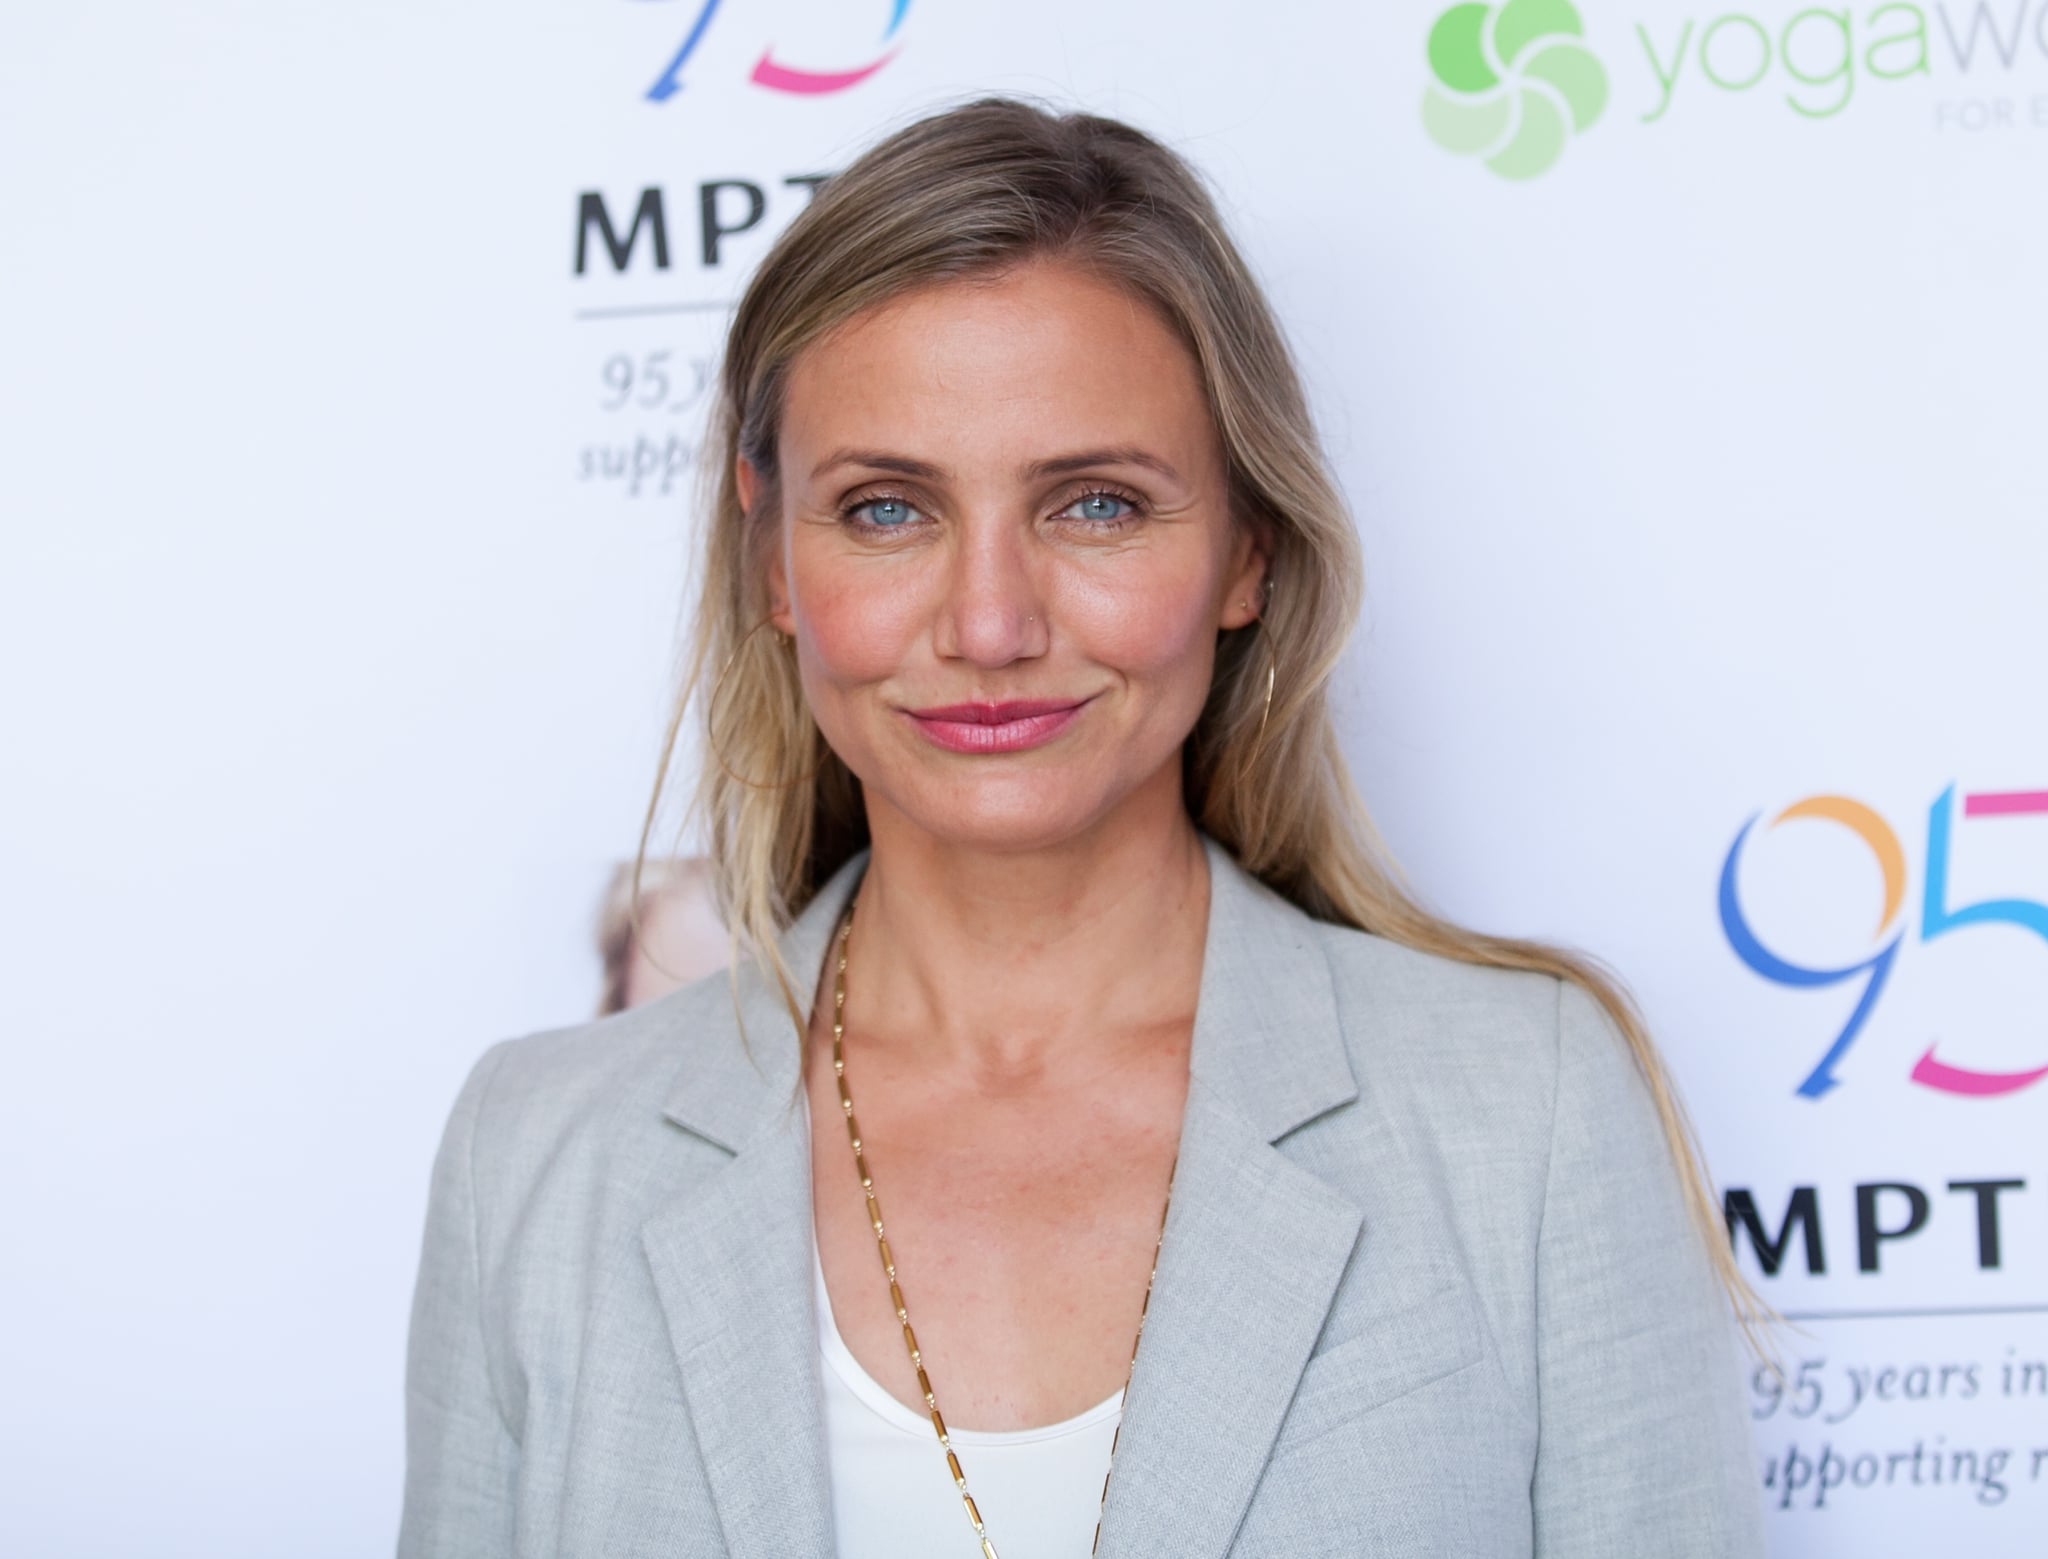 Cameron Diaz at the MPTF Celebration for health and fitness in 2016